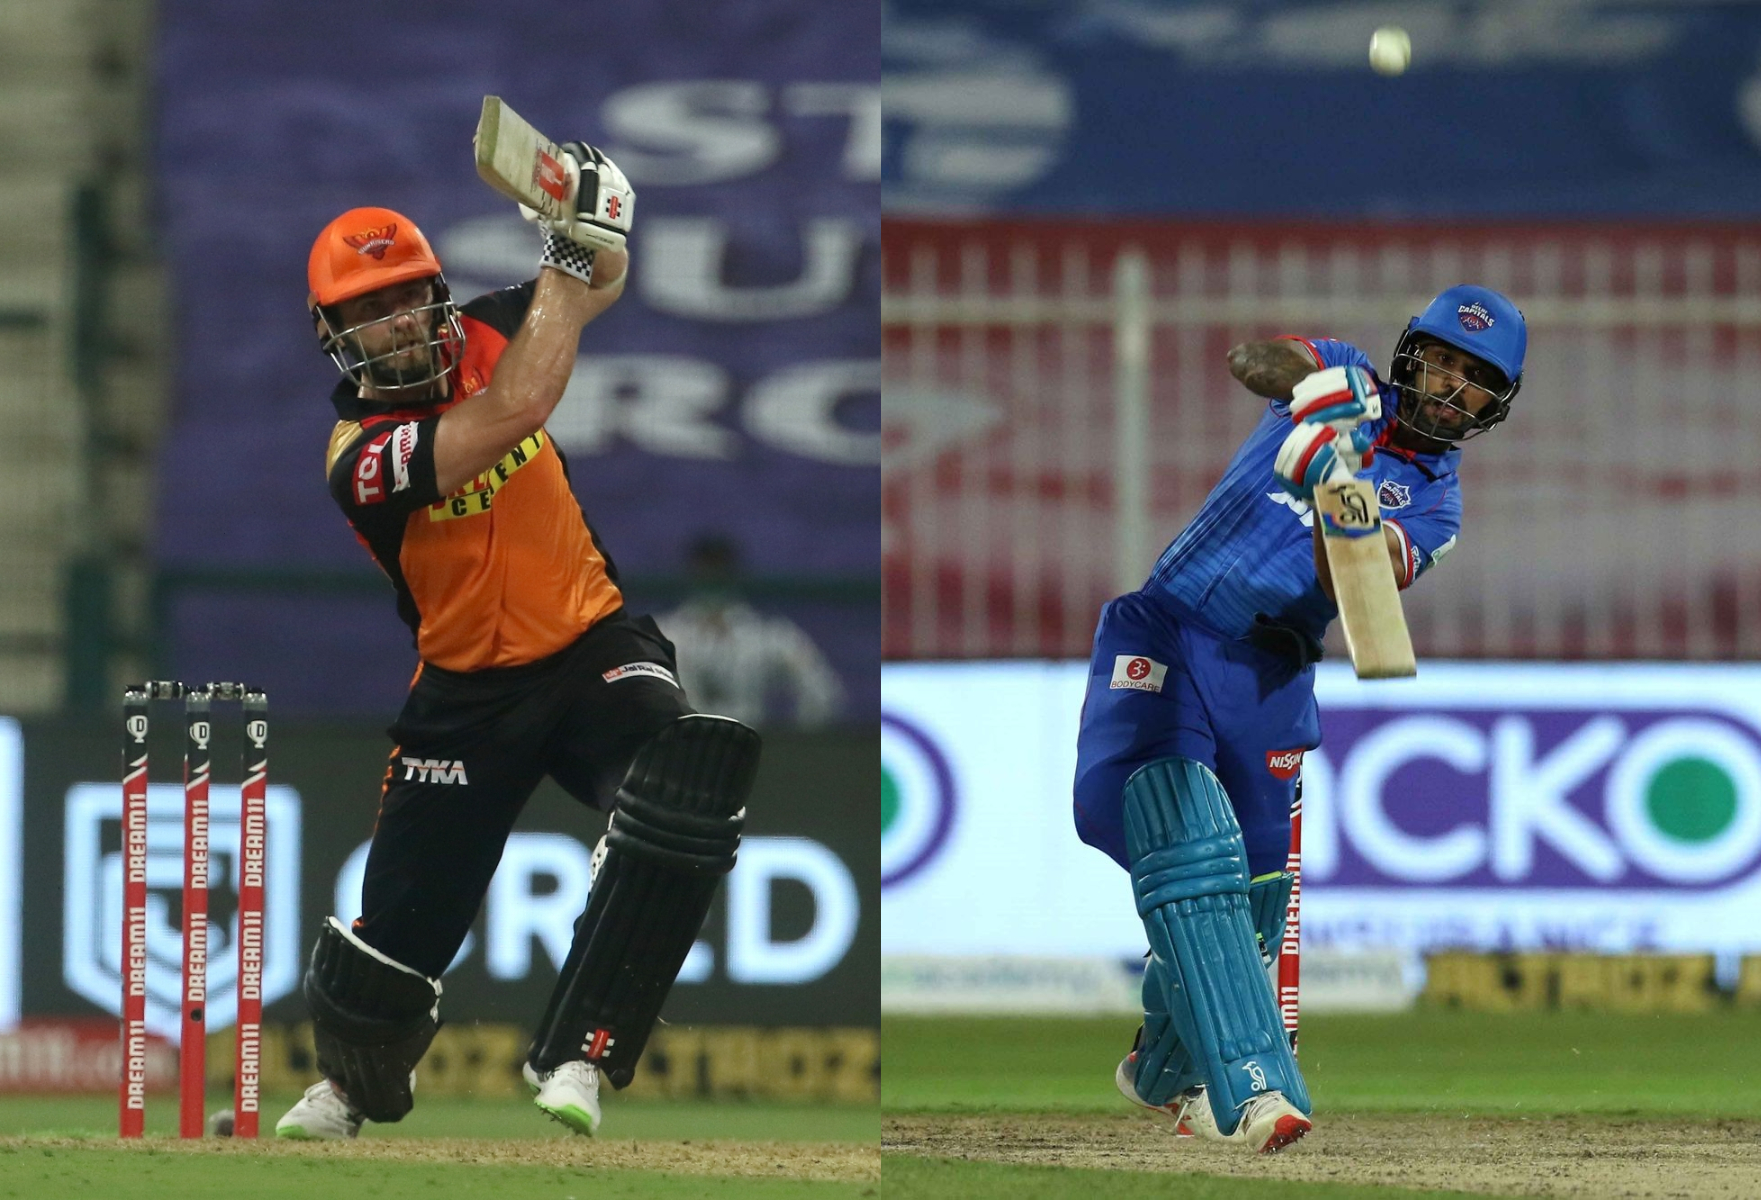 Both Kane and Dhawan have played match-winning knocks for their teams | BCCI/IPL